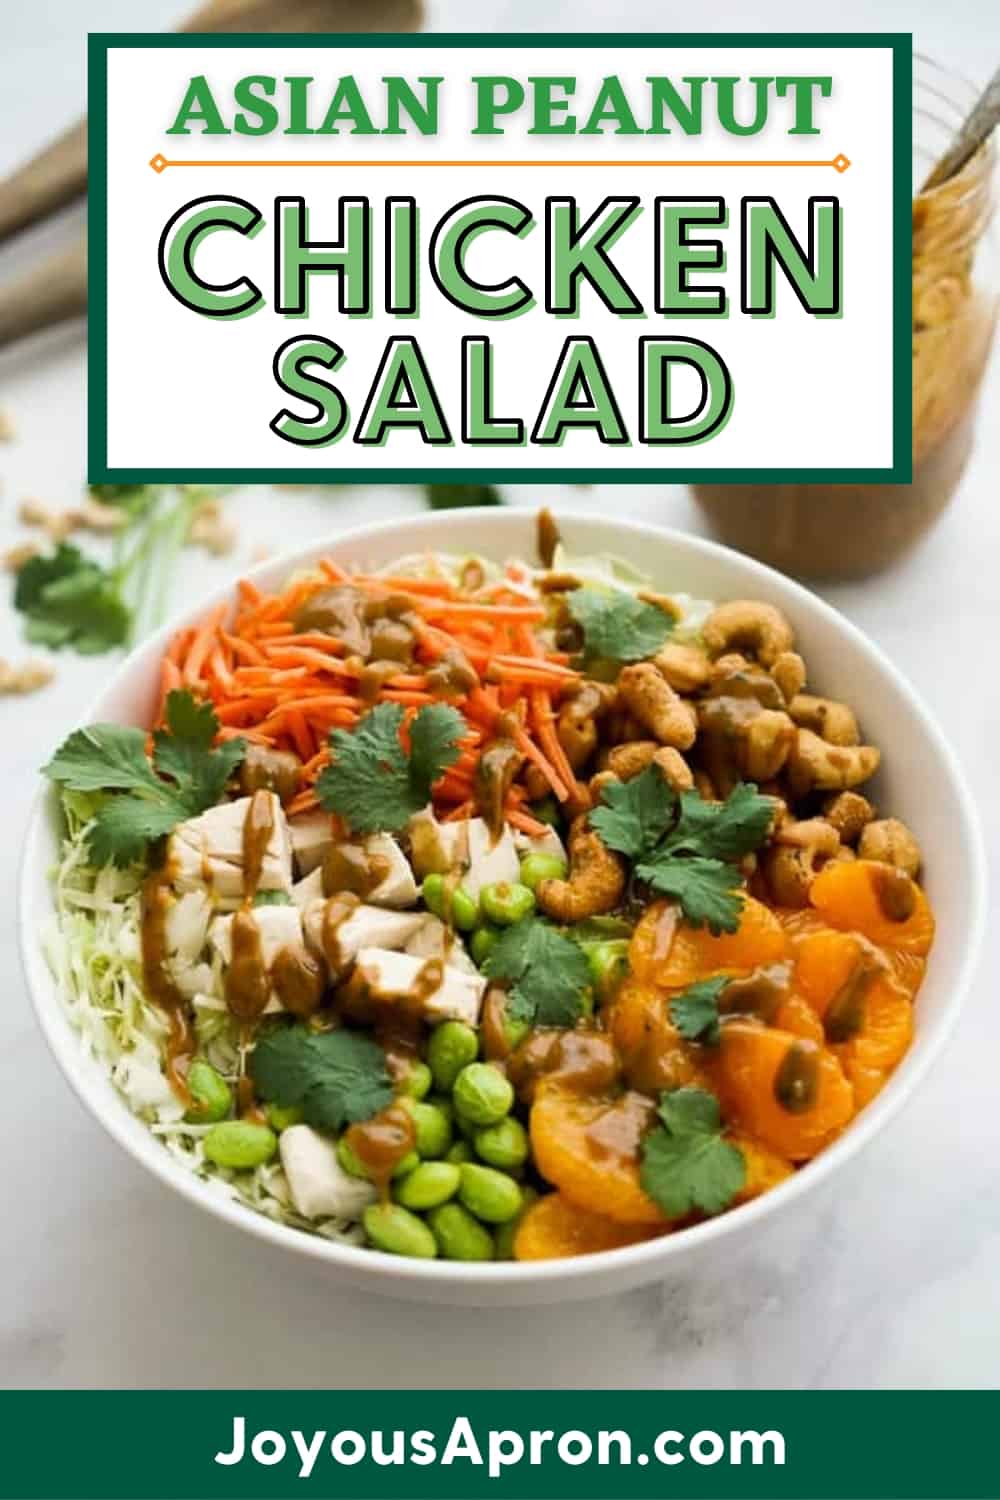 Asian Peanut Chicken Salad - a healthy, light, quick and yummy no cook dinner or lunch! Veggies such as crunchy cabbage, carrots, edamame, mandarin oranges, honey roasted cashews, shredded rotisserie chicken tossed in a yummy homemade peanut dressing. Takes less than 30 minutes and perfect for meal prep! via @joyousapron